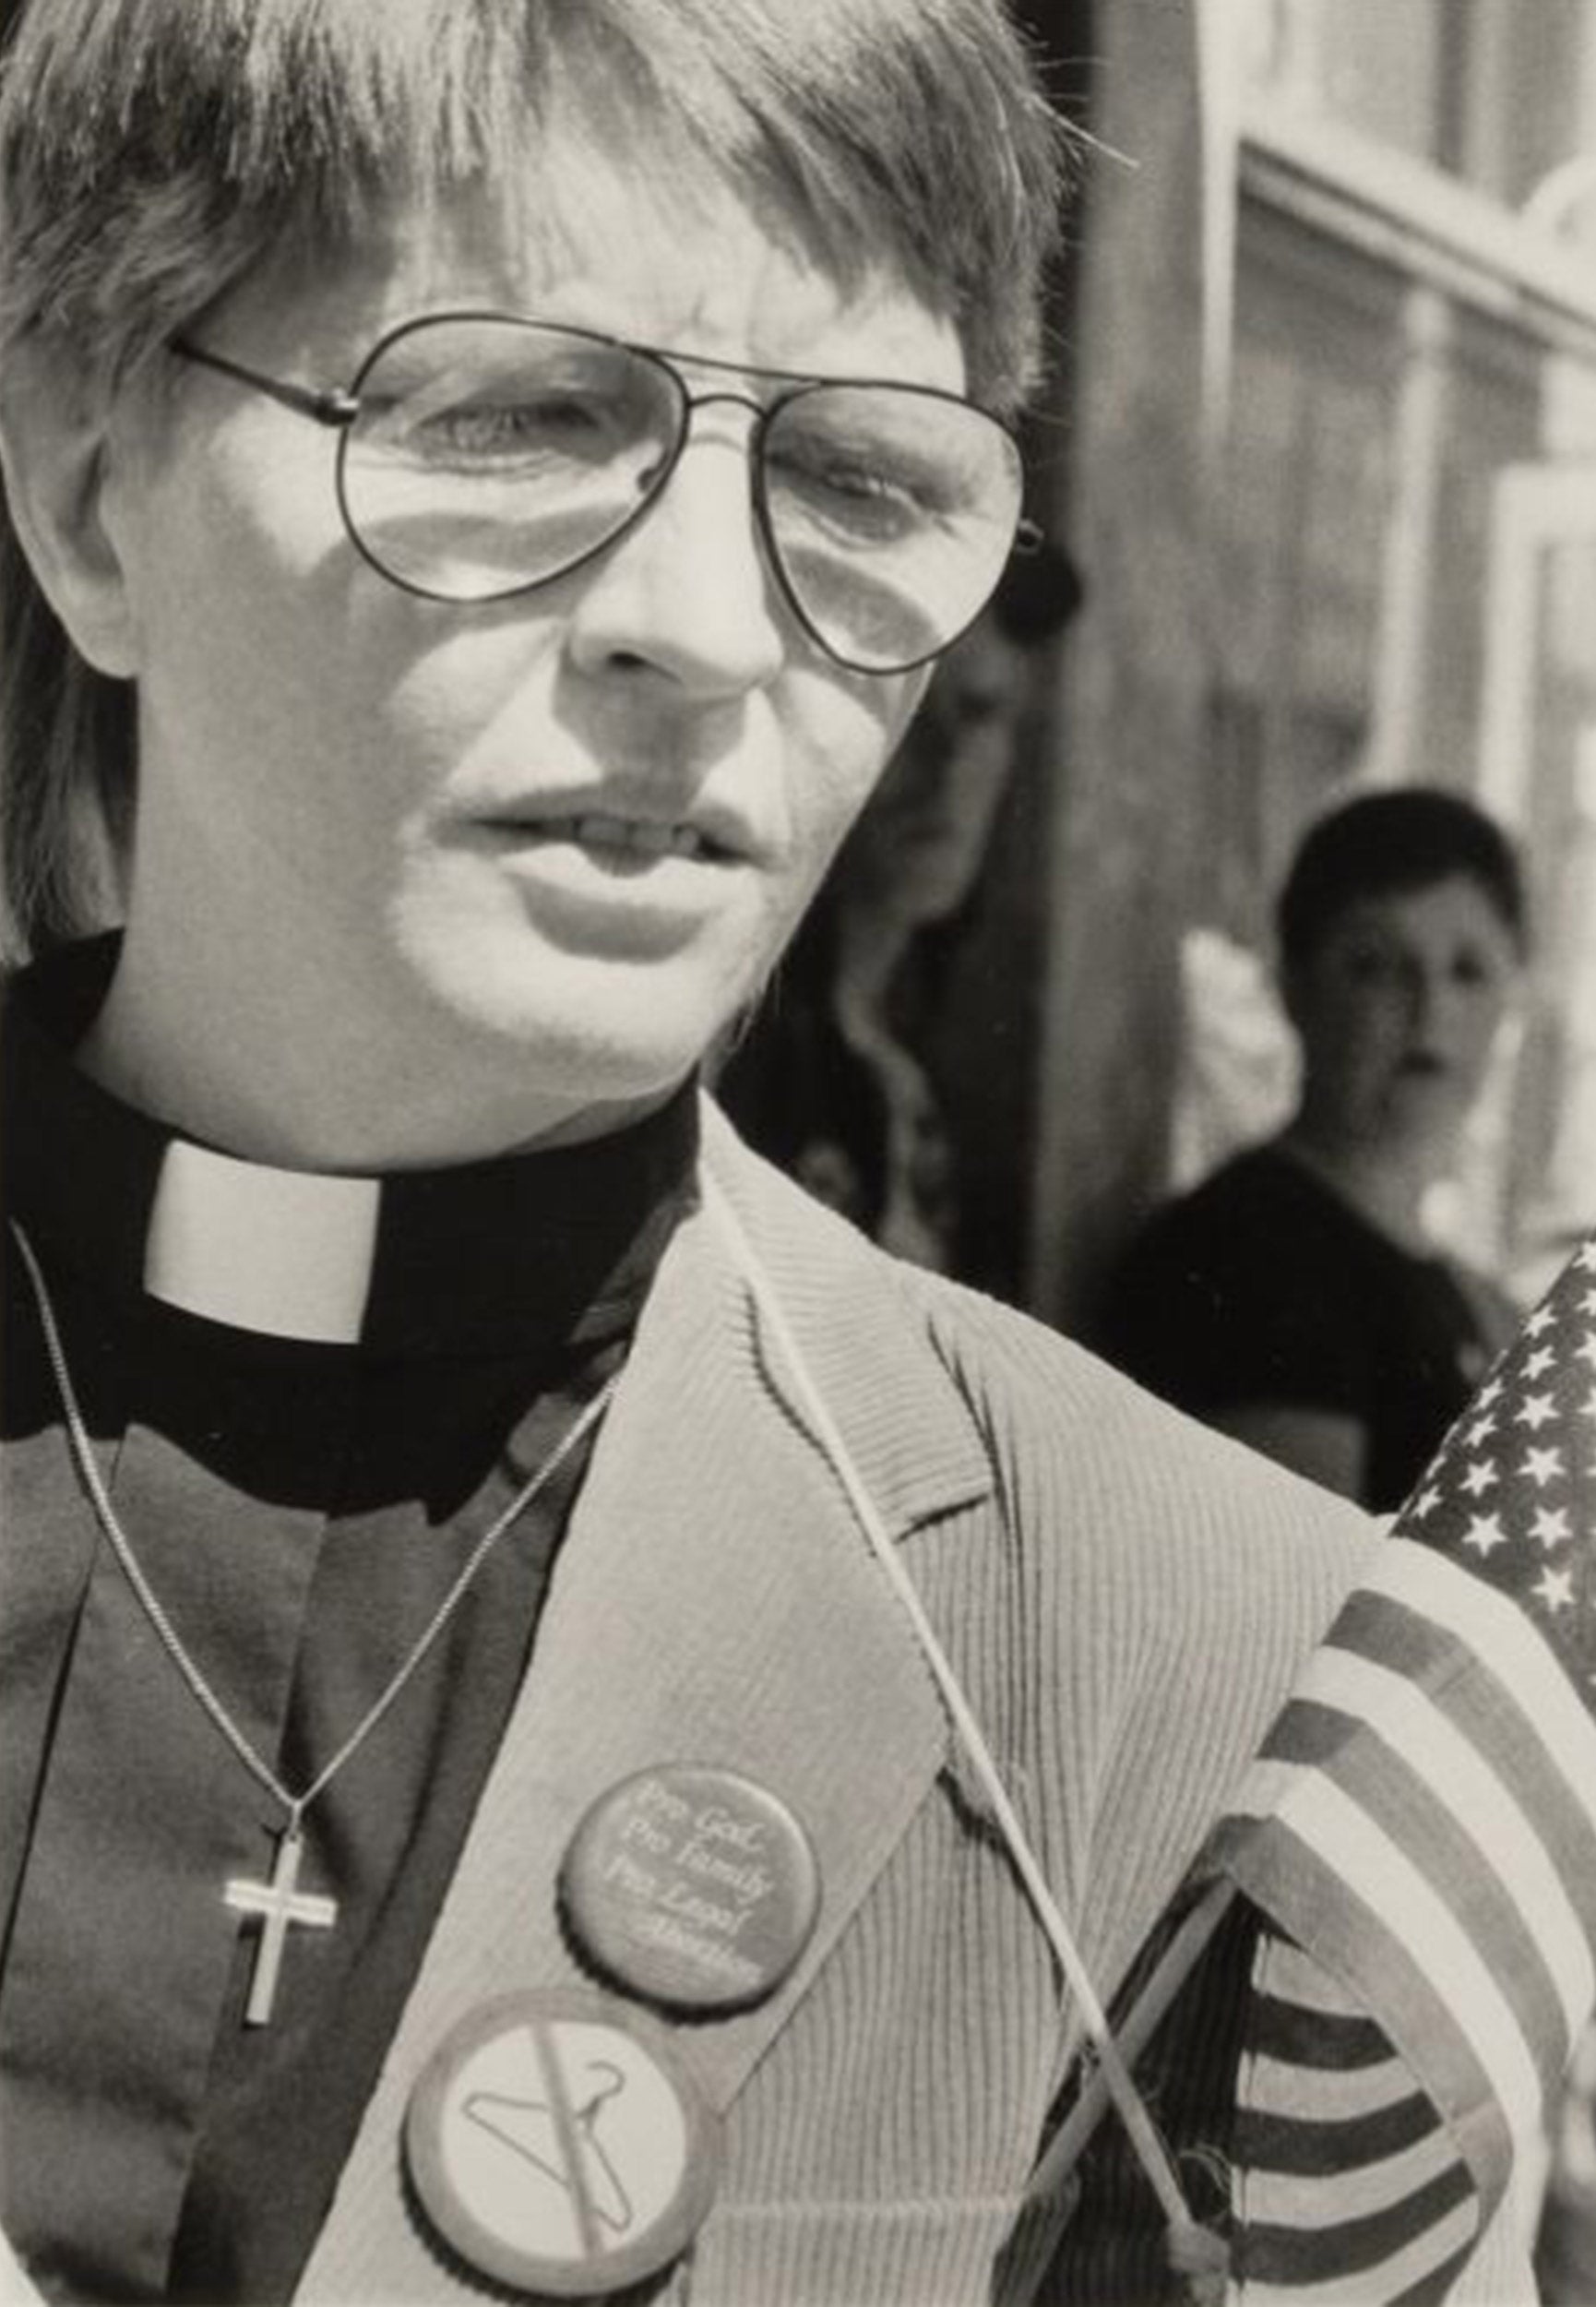 Minister demonstrates for abortion rights in 1985.